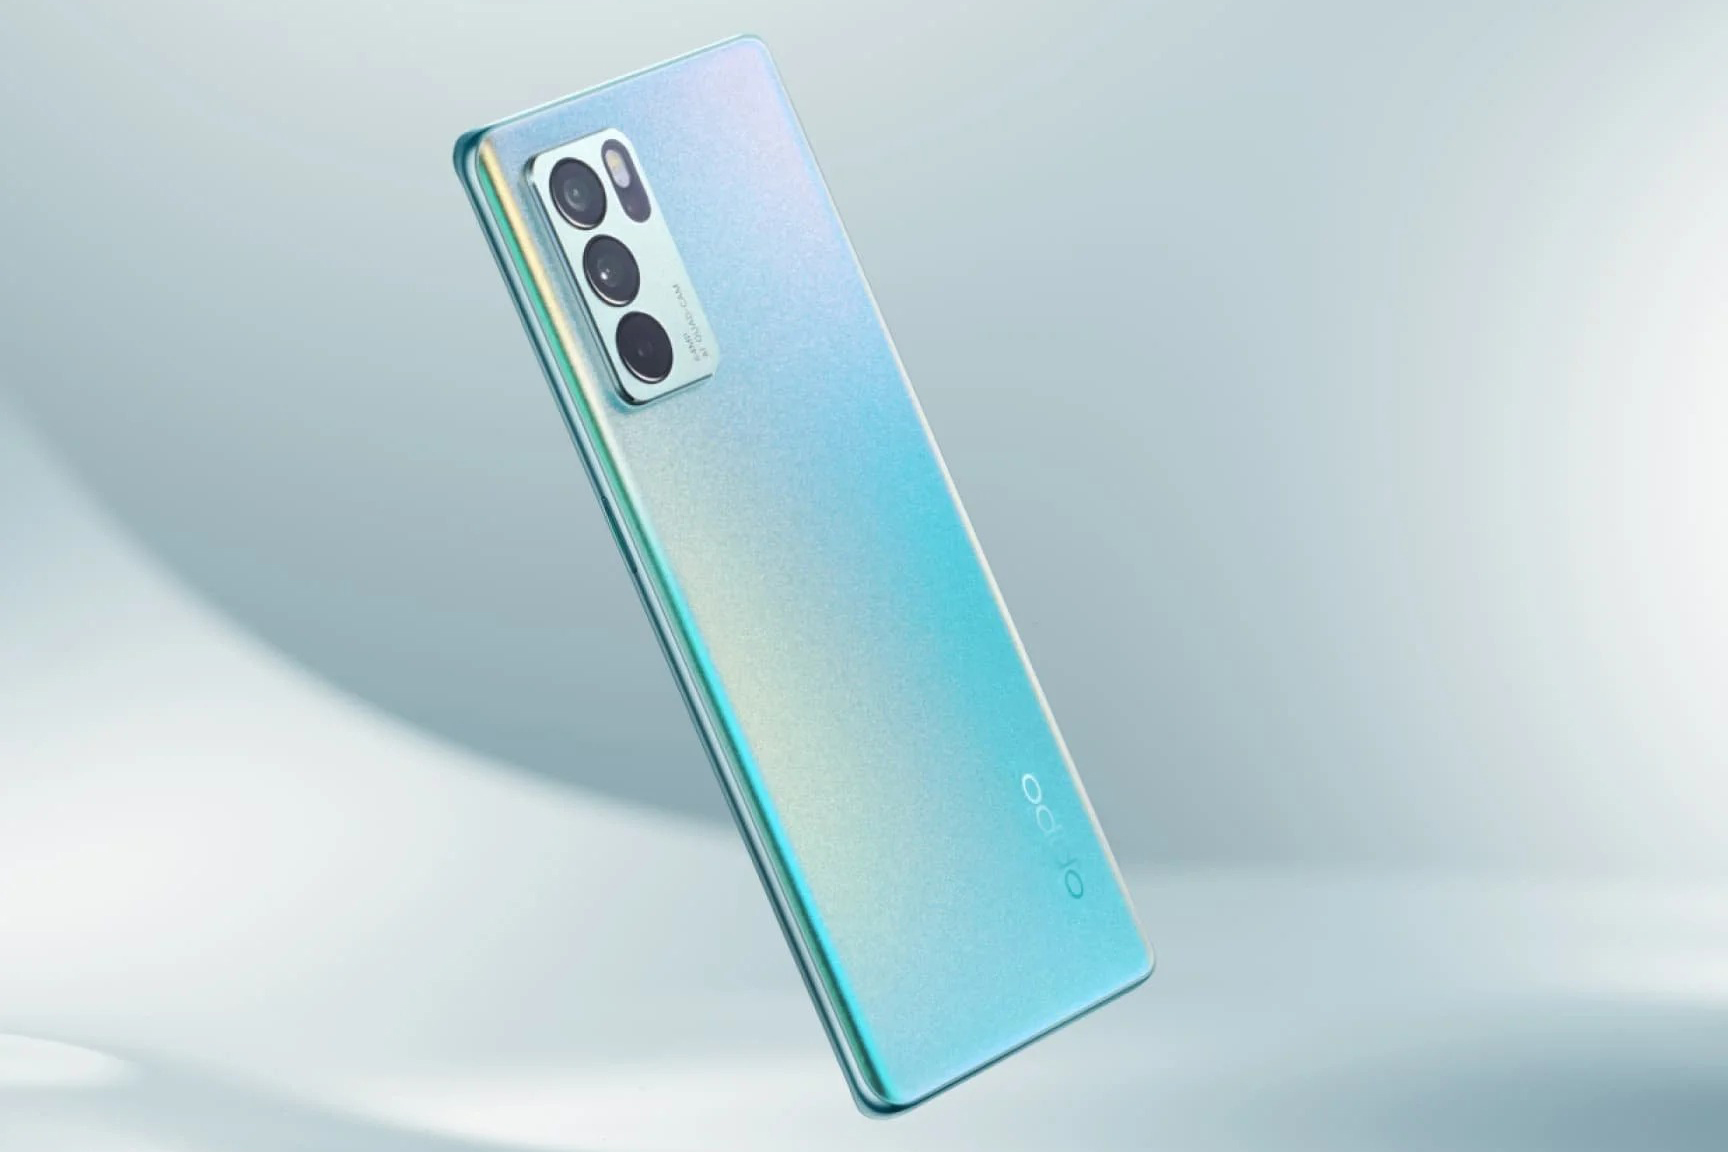 Oppo Reno 6, Reno 6 Pro 5G smartphones with 65W fast charging launched in  India – price, specifications and availability details